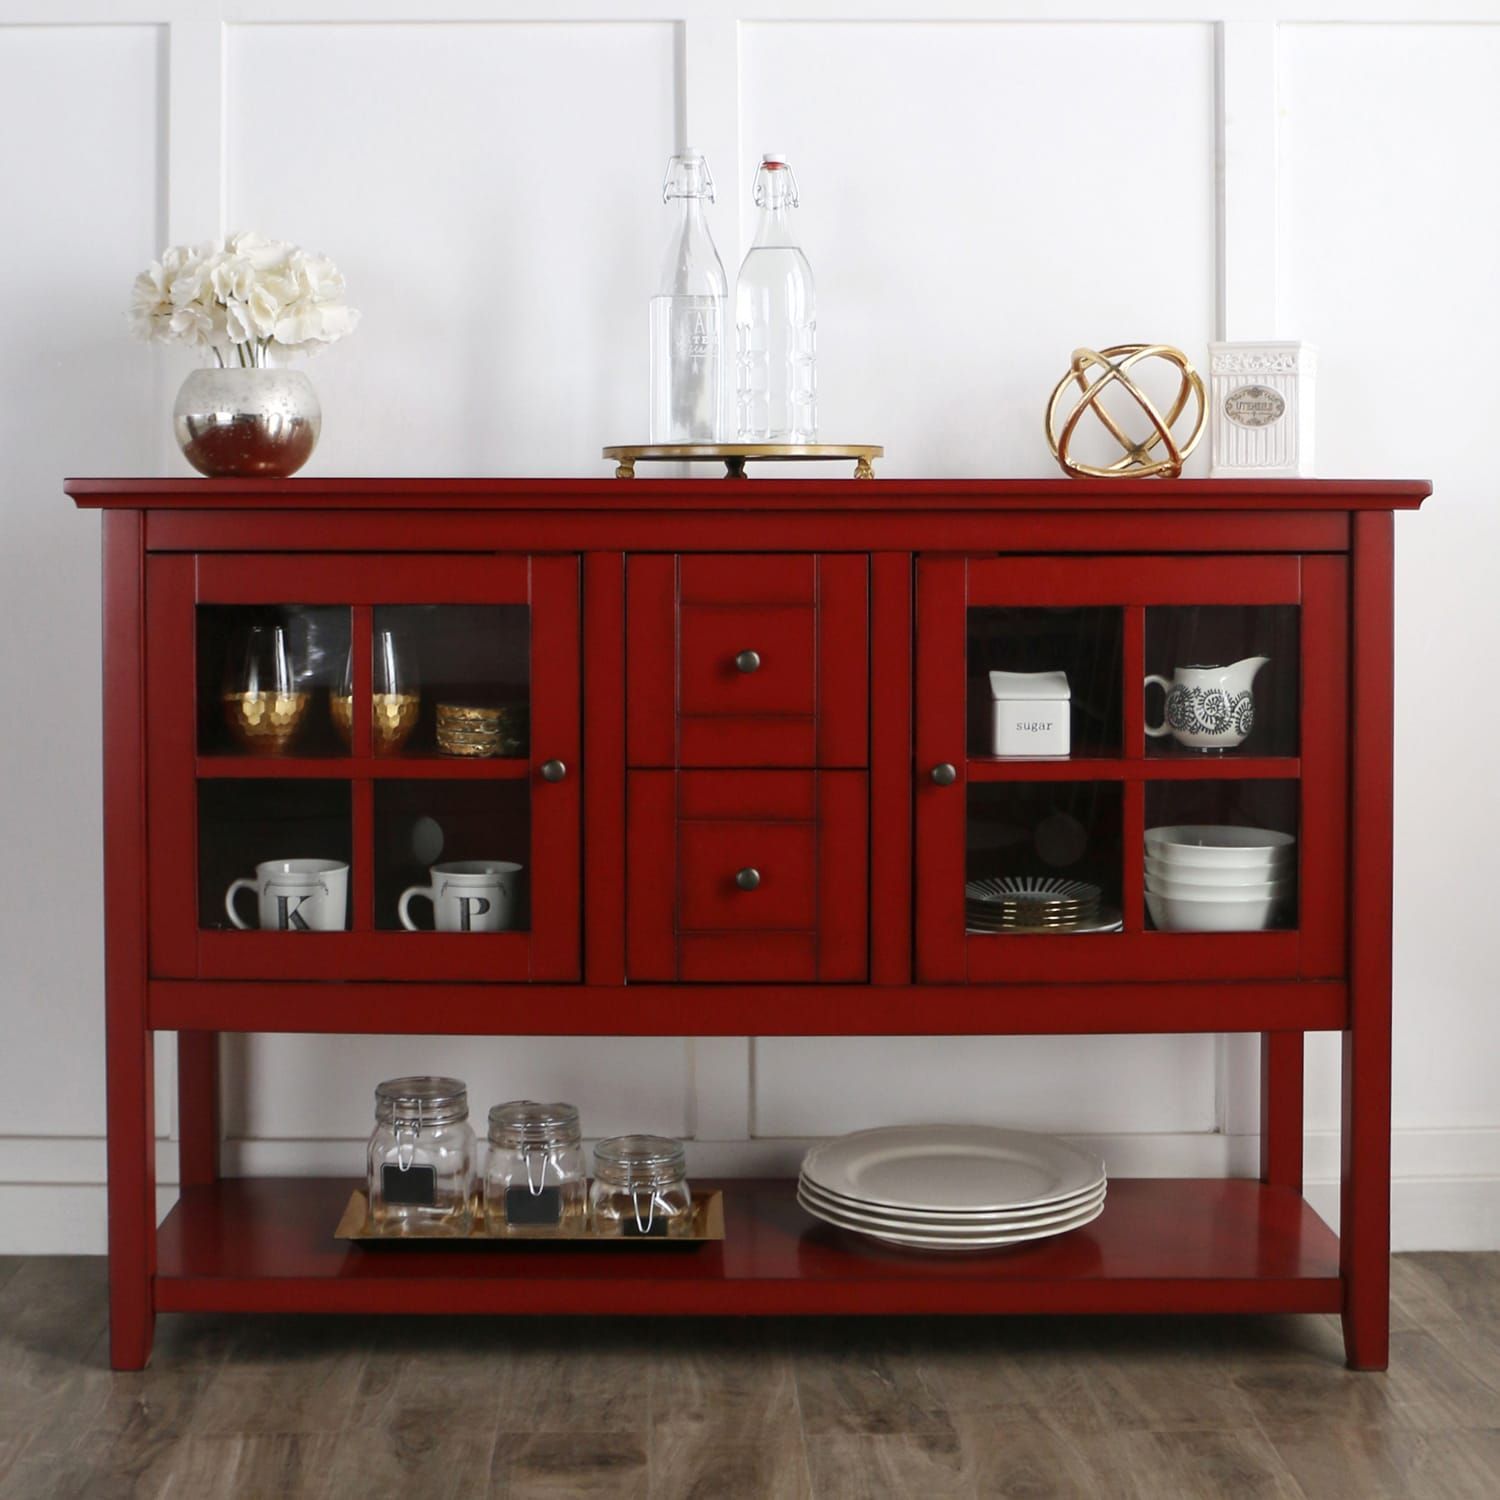 52" Antique Red Tv Stand & Buffet In 2019 | *living Room Inside Simple Living Layla Black Buffets (View 11 of 30)